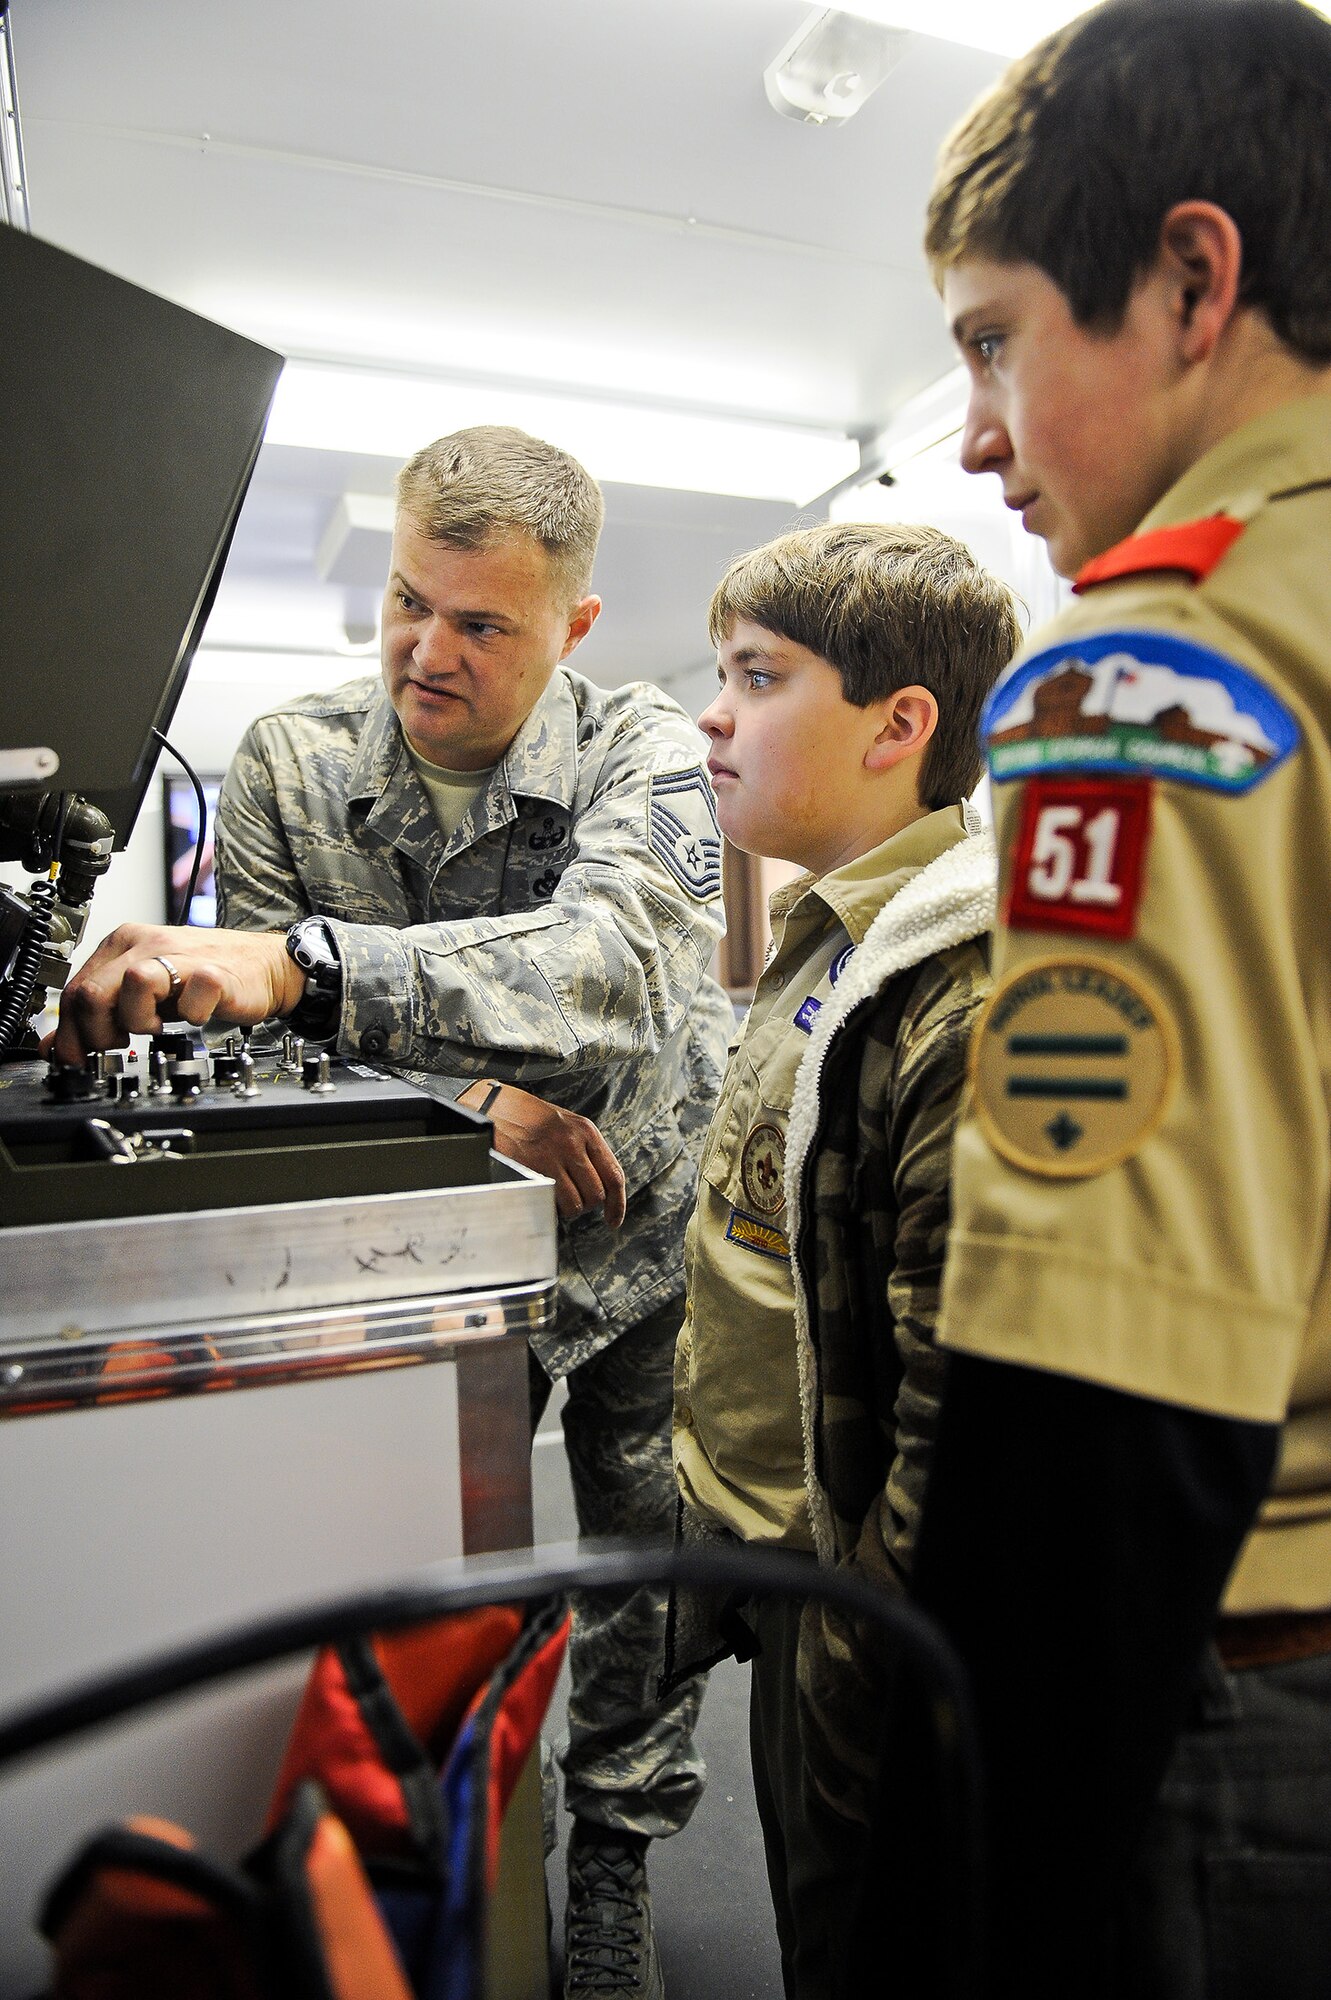 Air National Guard Senior Master Sgt. John Bell, 116th Civil Engineering Squadron explosive ordnance technician (EOD) demonstrates the Remote Ordnance Neutralization System to Boy Scouts at Robins Air Force Base, Ga., Jan. 22, 2012.  Troop 51 from Forsyth, Ga., visited the 116th EOD unit during a field trip to Robins Air Force Base. (National Guard photo by Master Sgt. Roger Parsons/Released)